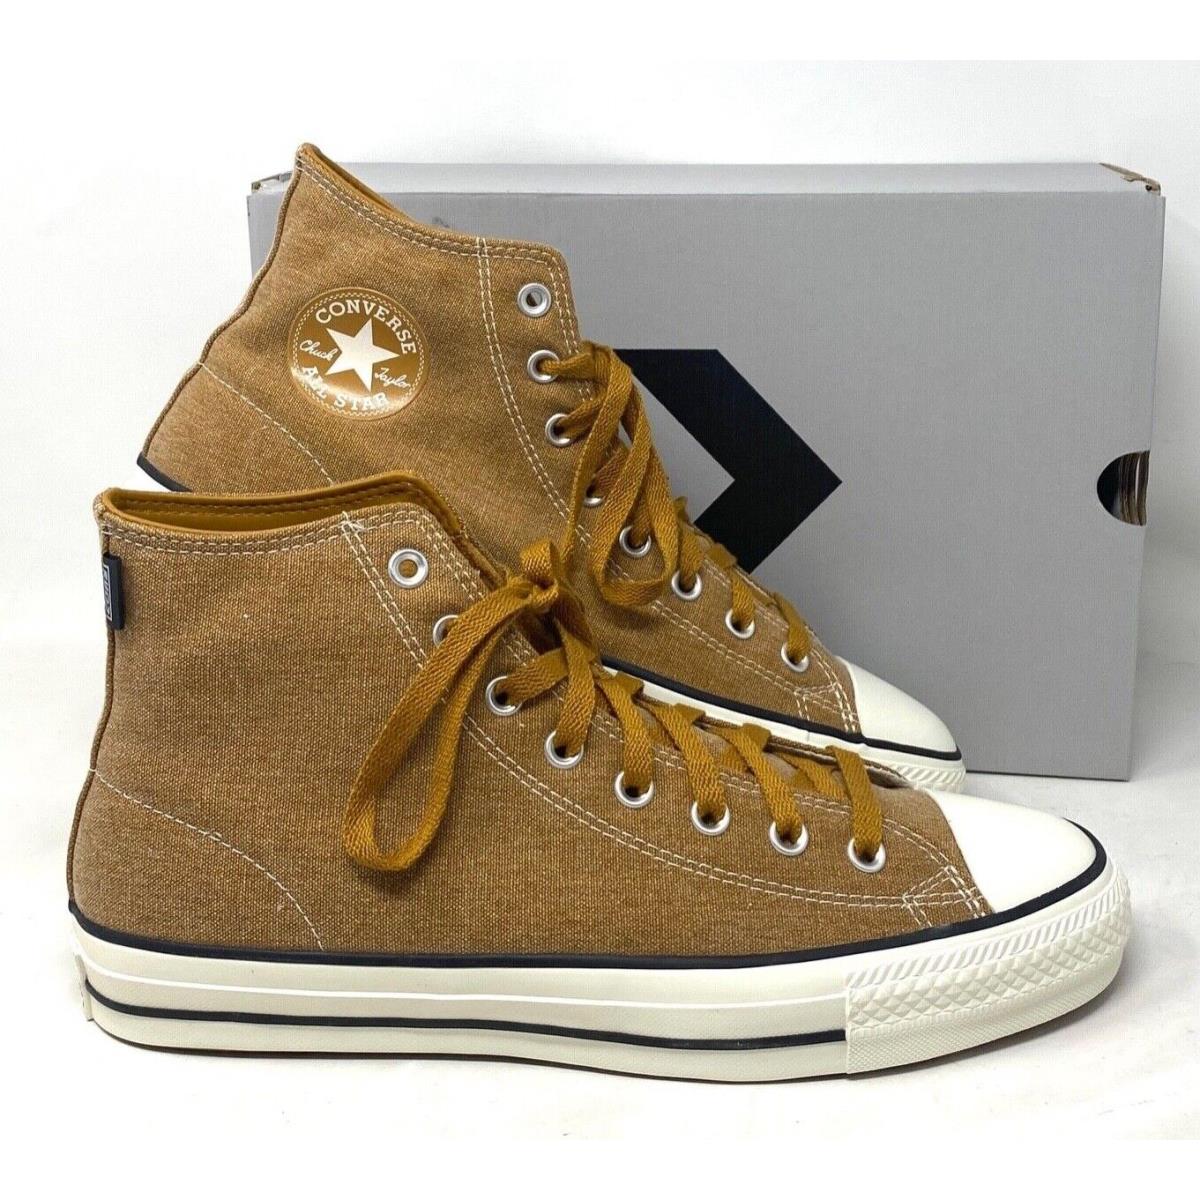 Converse Ctas Pro High For Men Shoes Casual Dark Soba Canvas Sneakers A05092C